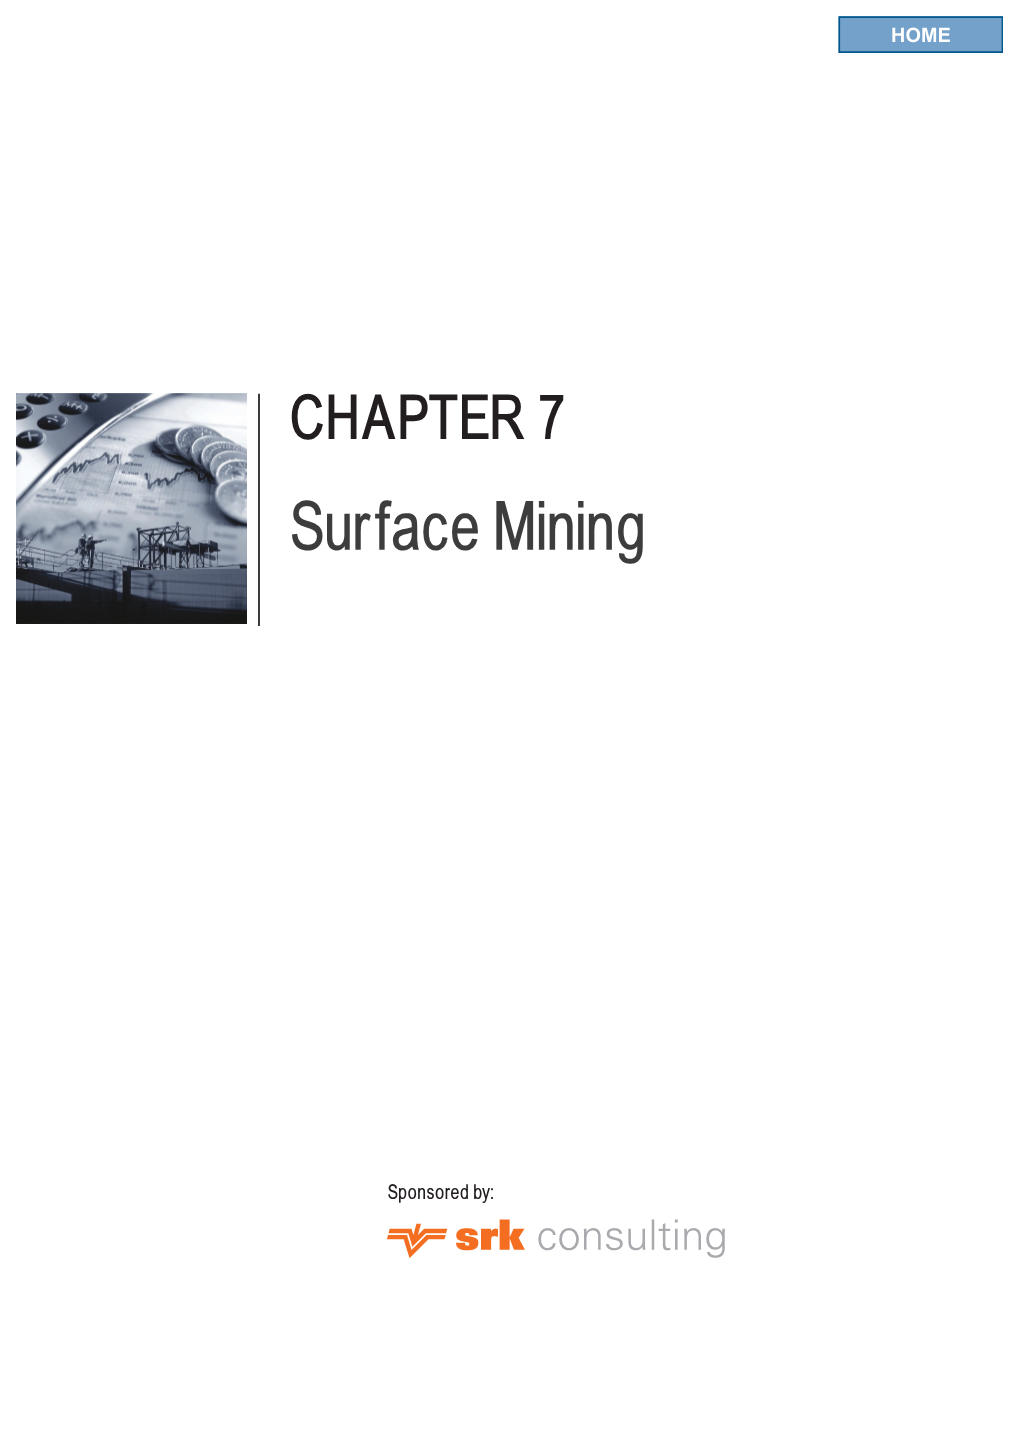 Chapter 7: Surface Mining